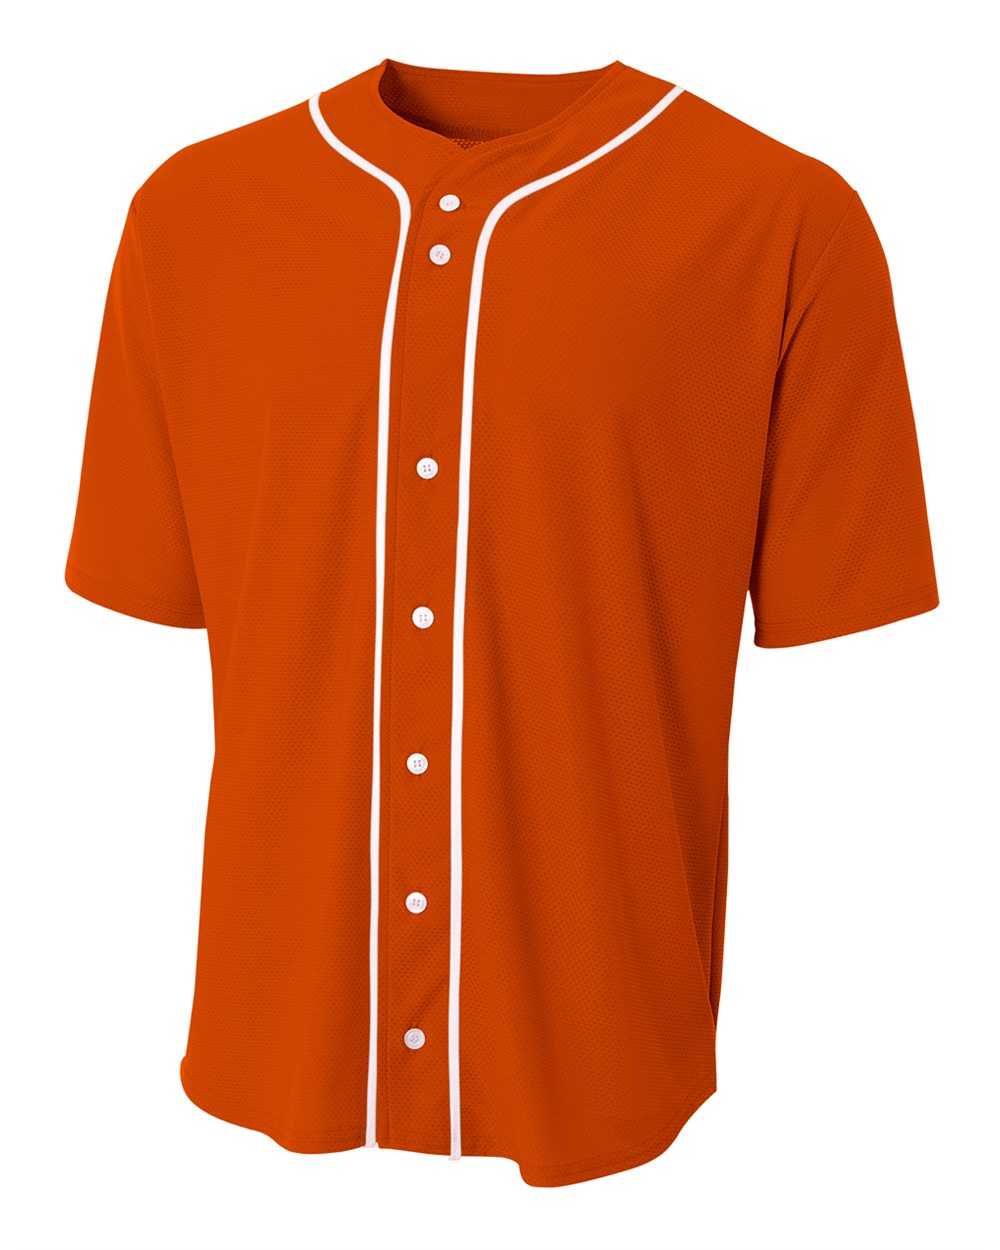 A4 NB4184 Youth Full Button Stretch Mesh Baseball Jersey - Athletic Orange White - HIT a Double